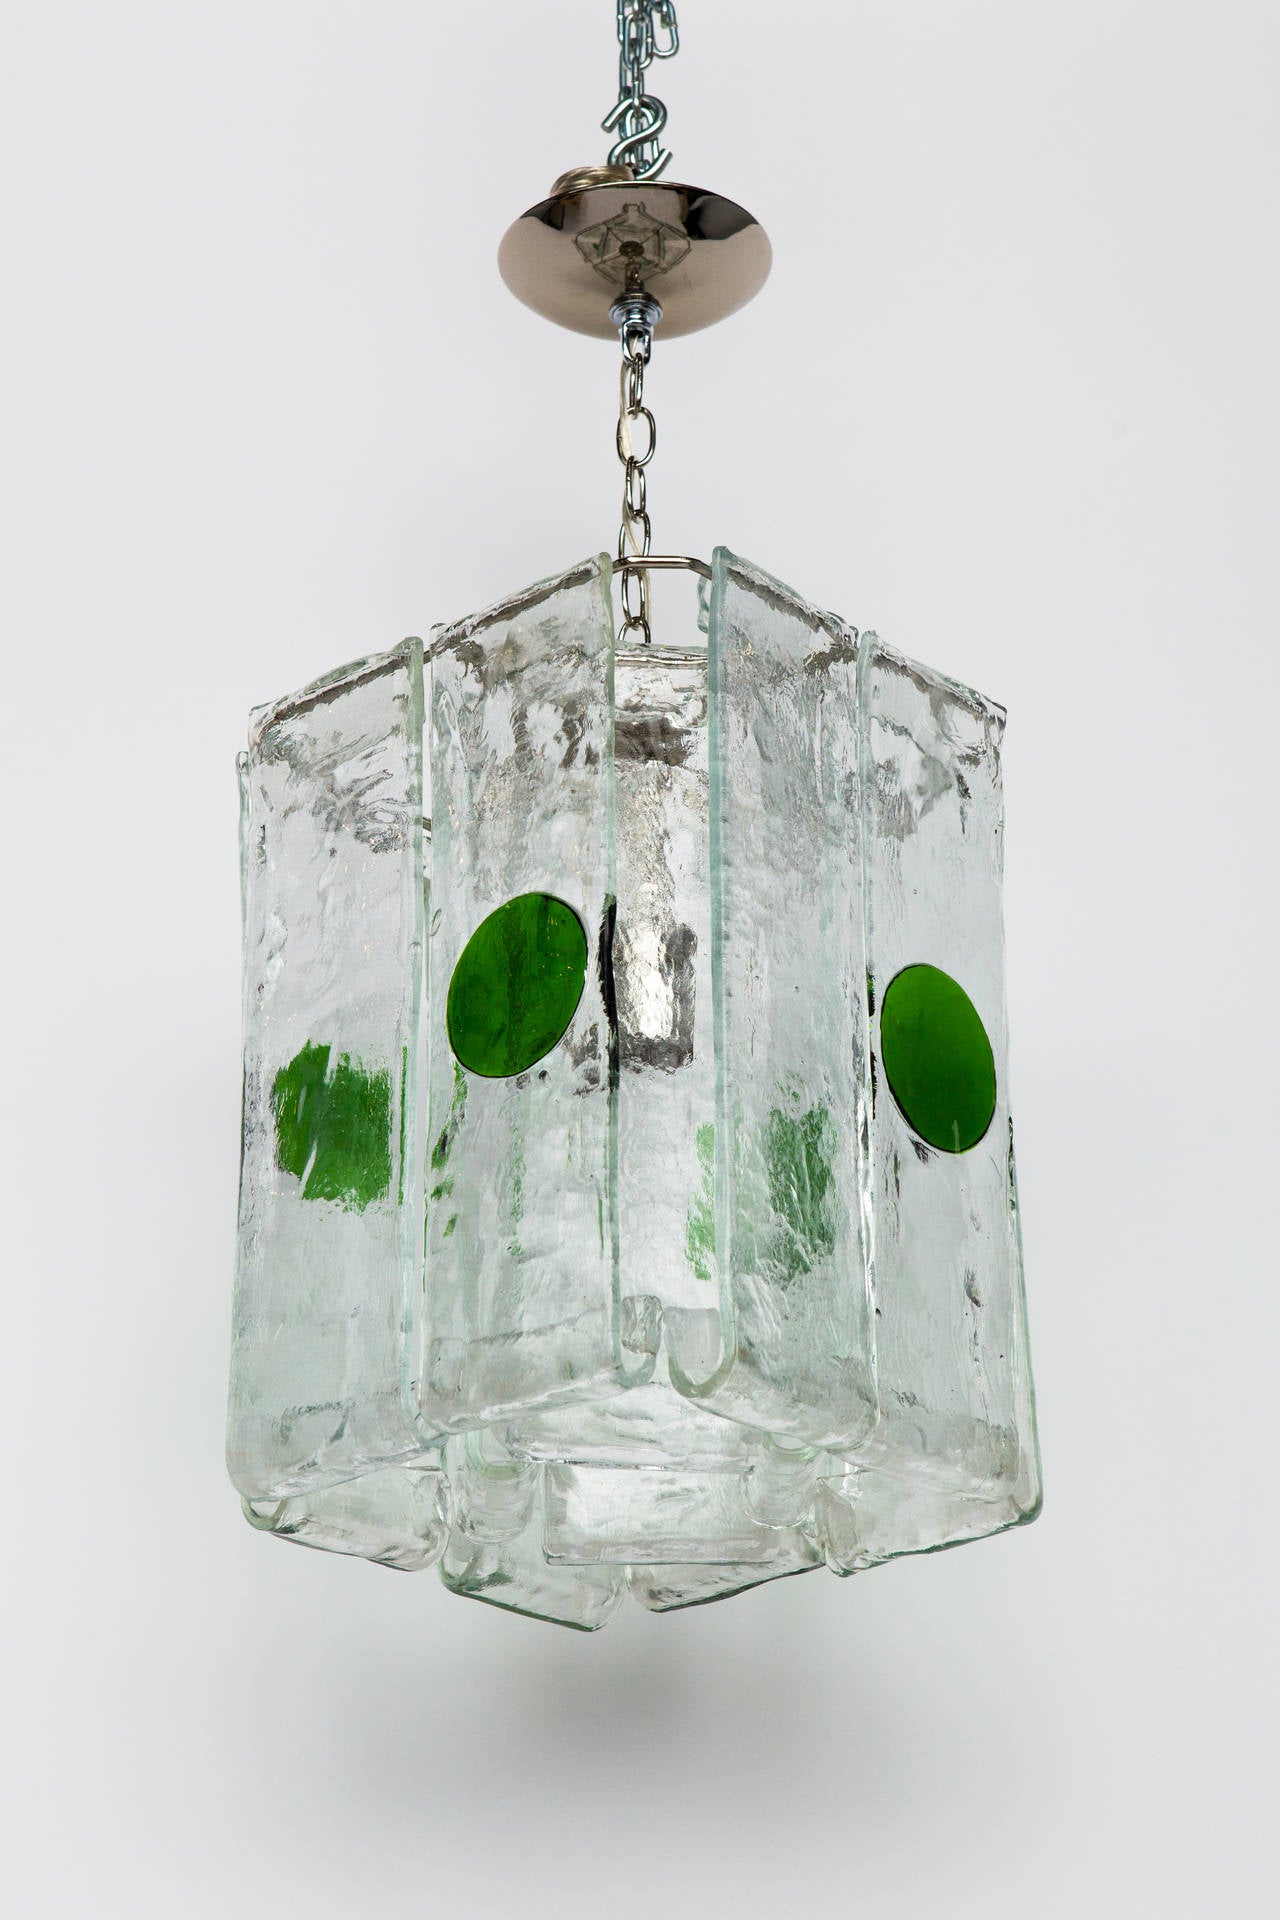 Pendant featuring 12 hung cast-glass panels with textured surfaces. 
Green spot pendant by Mazzega
Nickel steel frame with one socket. Made in Italy.
Measurement just for the glass body is 17